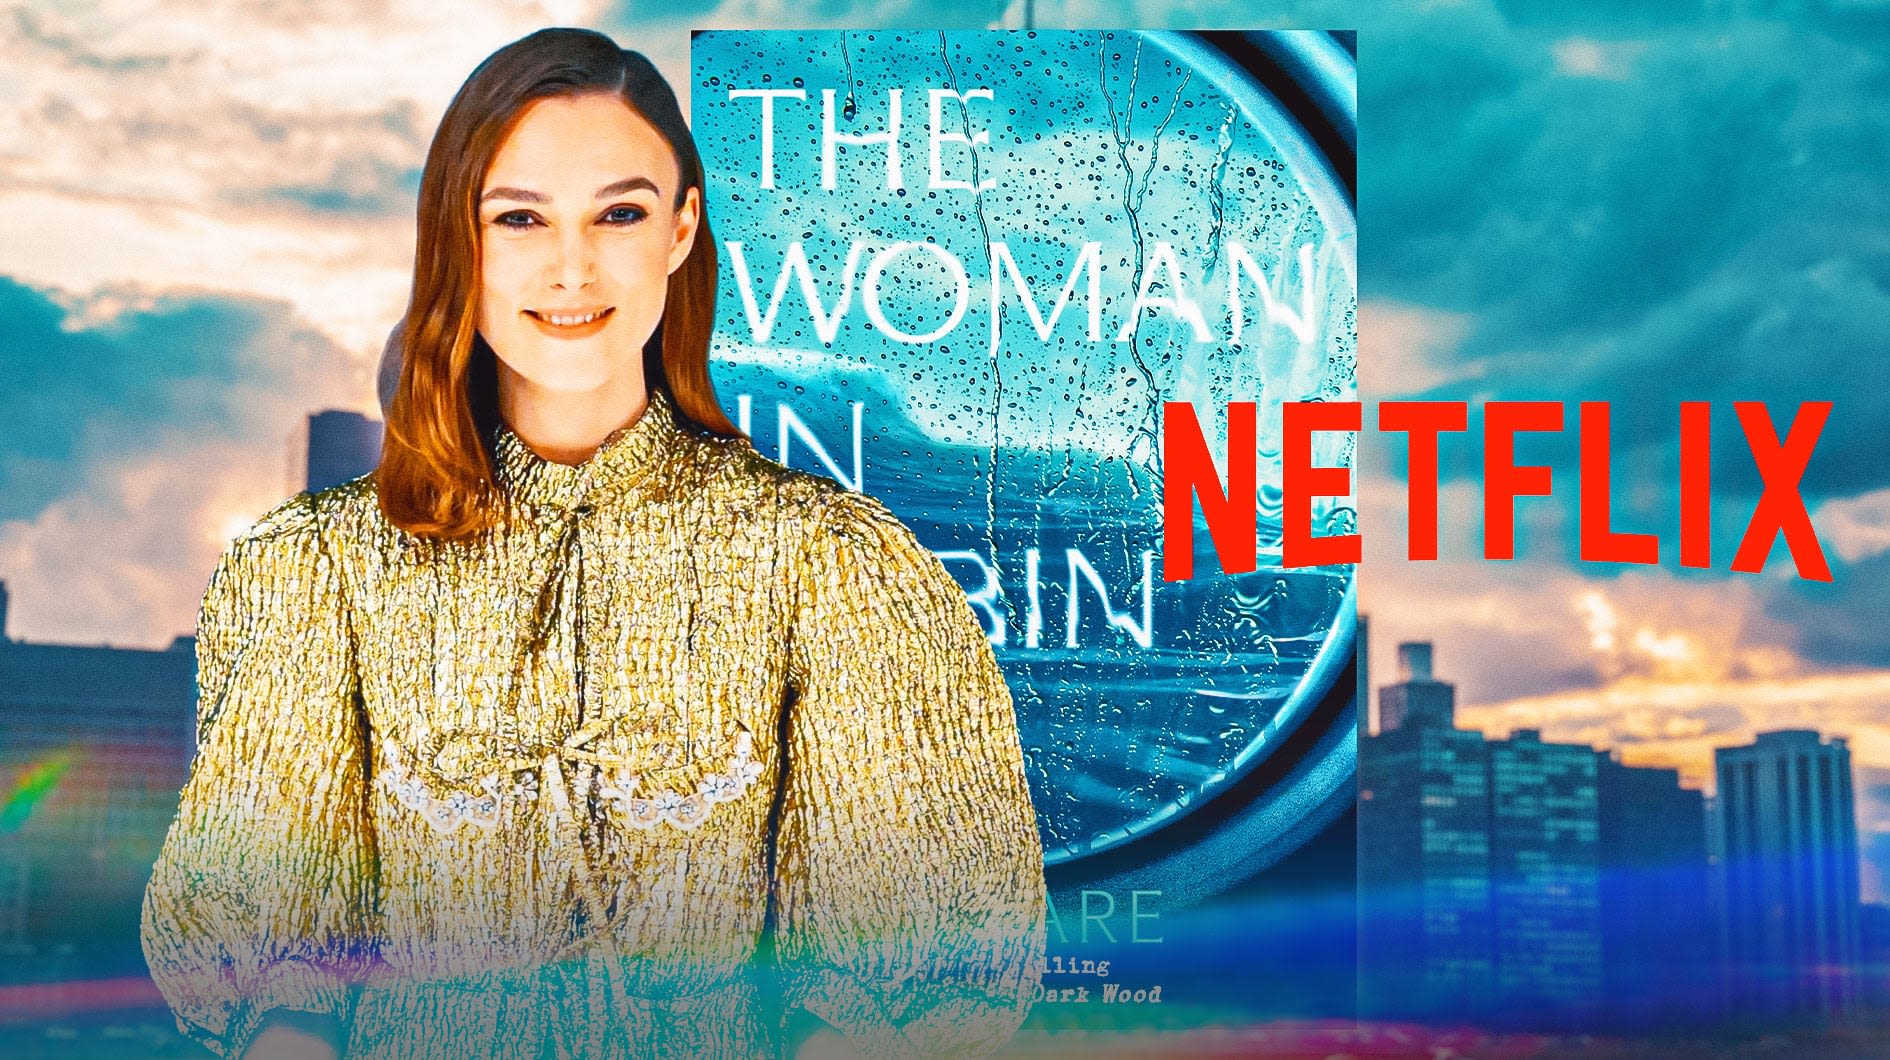 Keira Knightley leads film adaptation of The Woman in Cabin 10